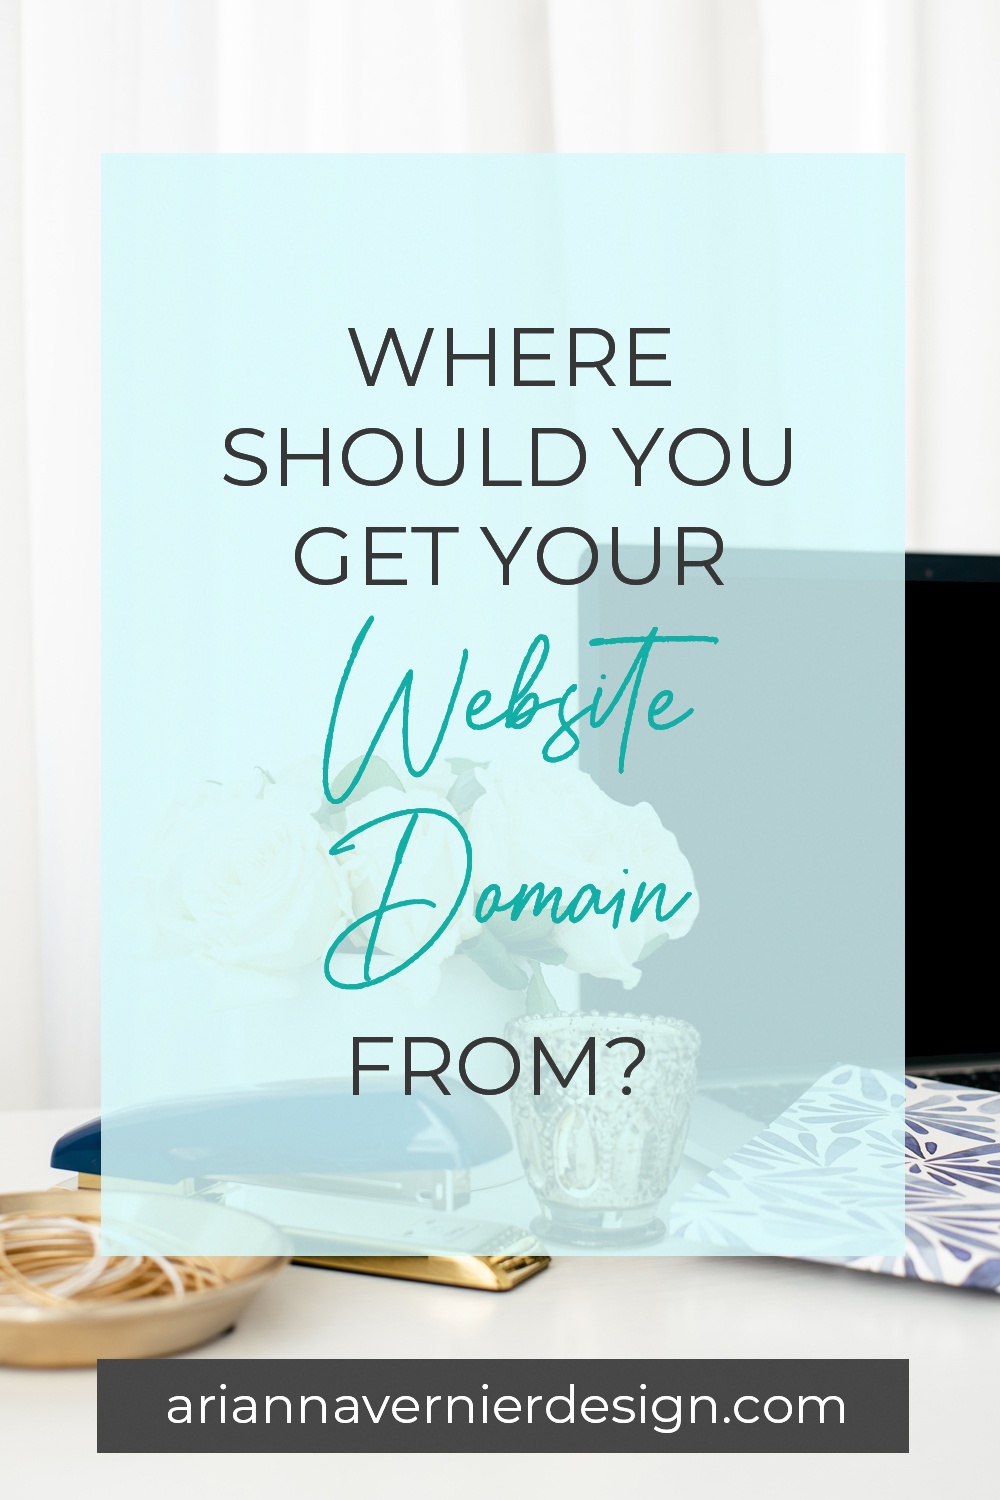 Pinterest pin with a laptop in the background, with a light blue rectangle over top, and the title "Where Should You Get Your Website Domain From?"